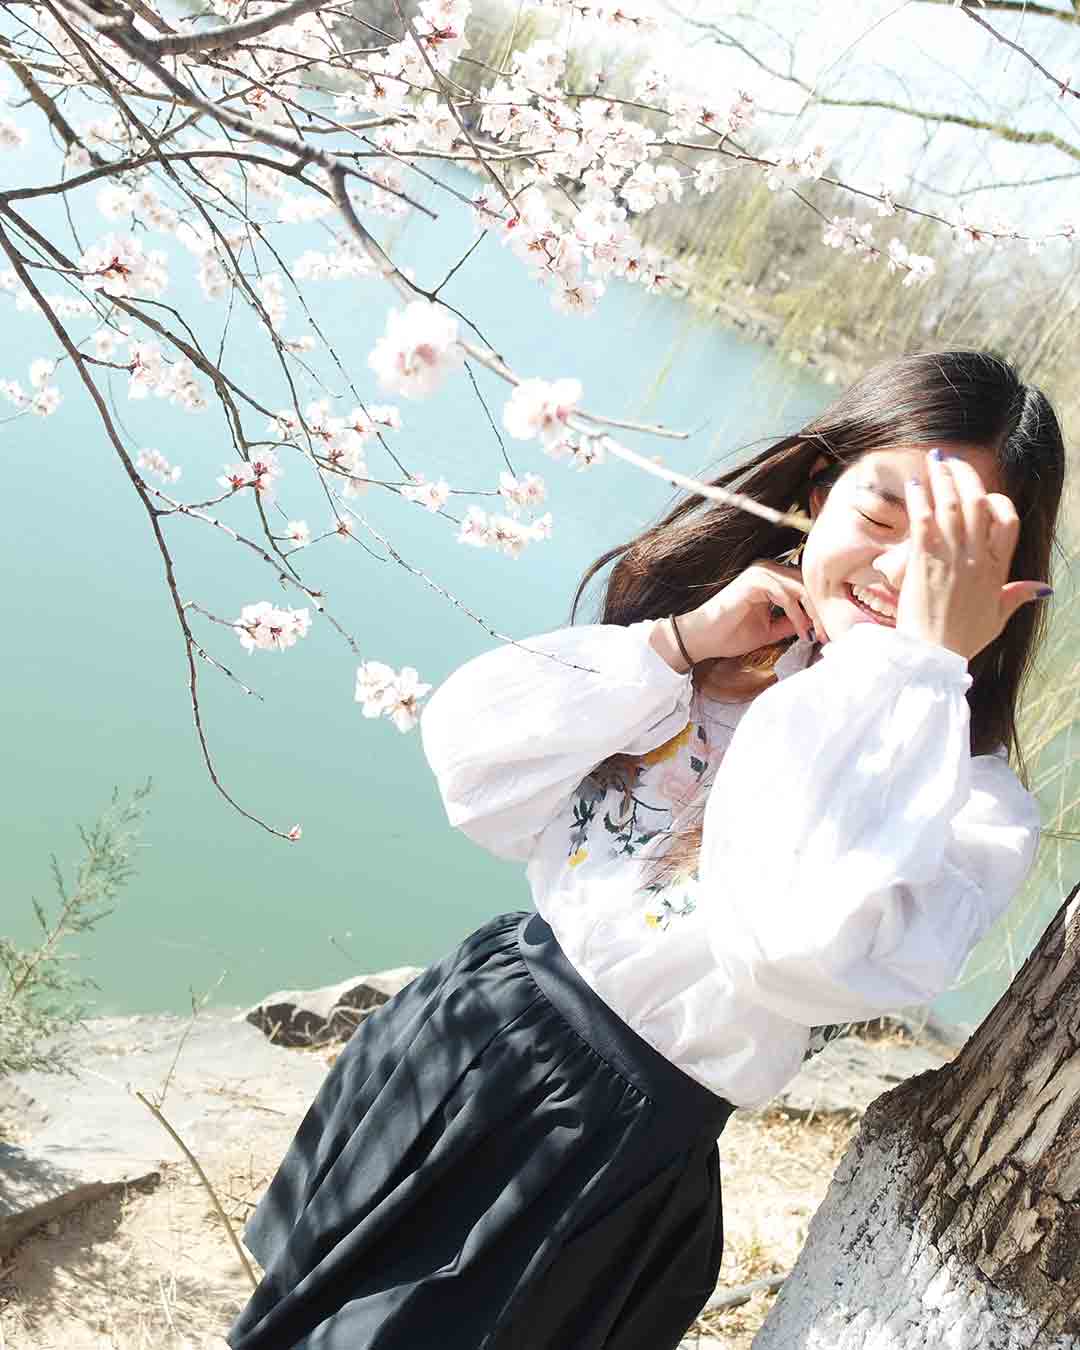 Anna laughing with cherry blossom trees in the background